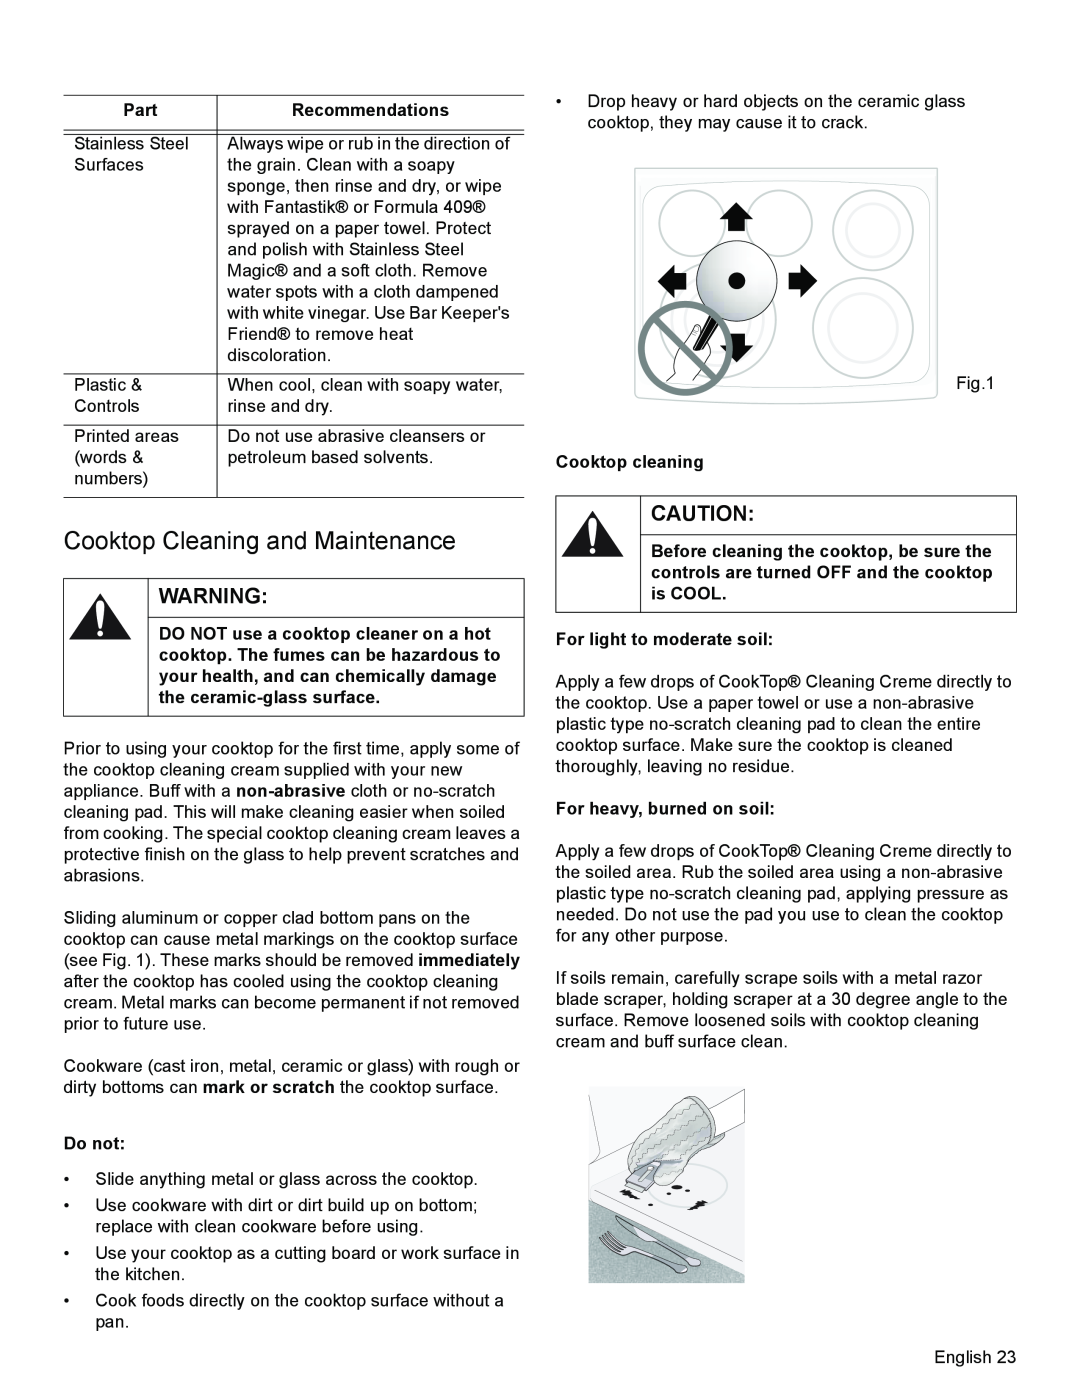 Bosch Appliances HES3063U manual Cooktop Cleaning and Maintenance, Part, Recommendations, Do not, Cooktop cleaning 